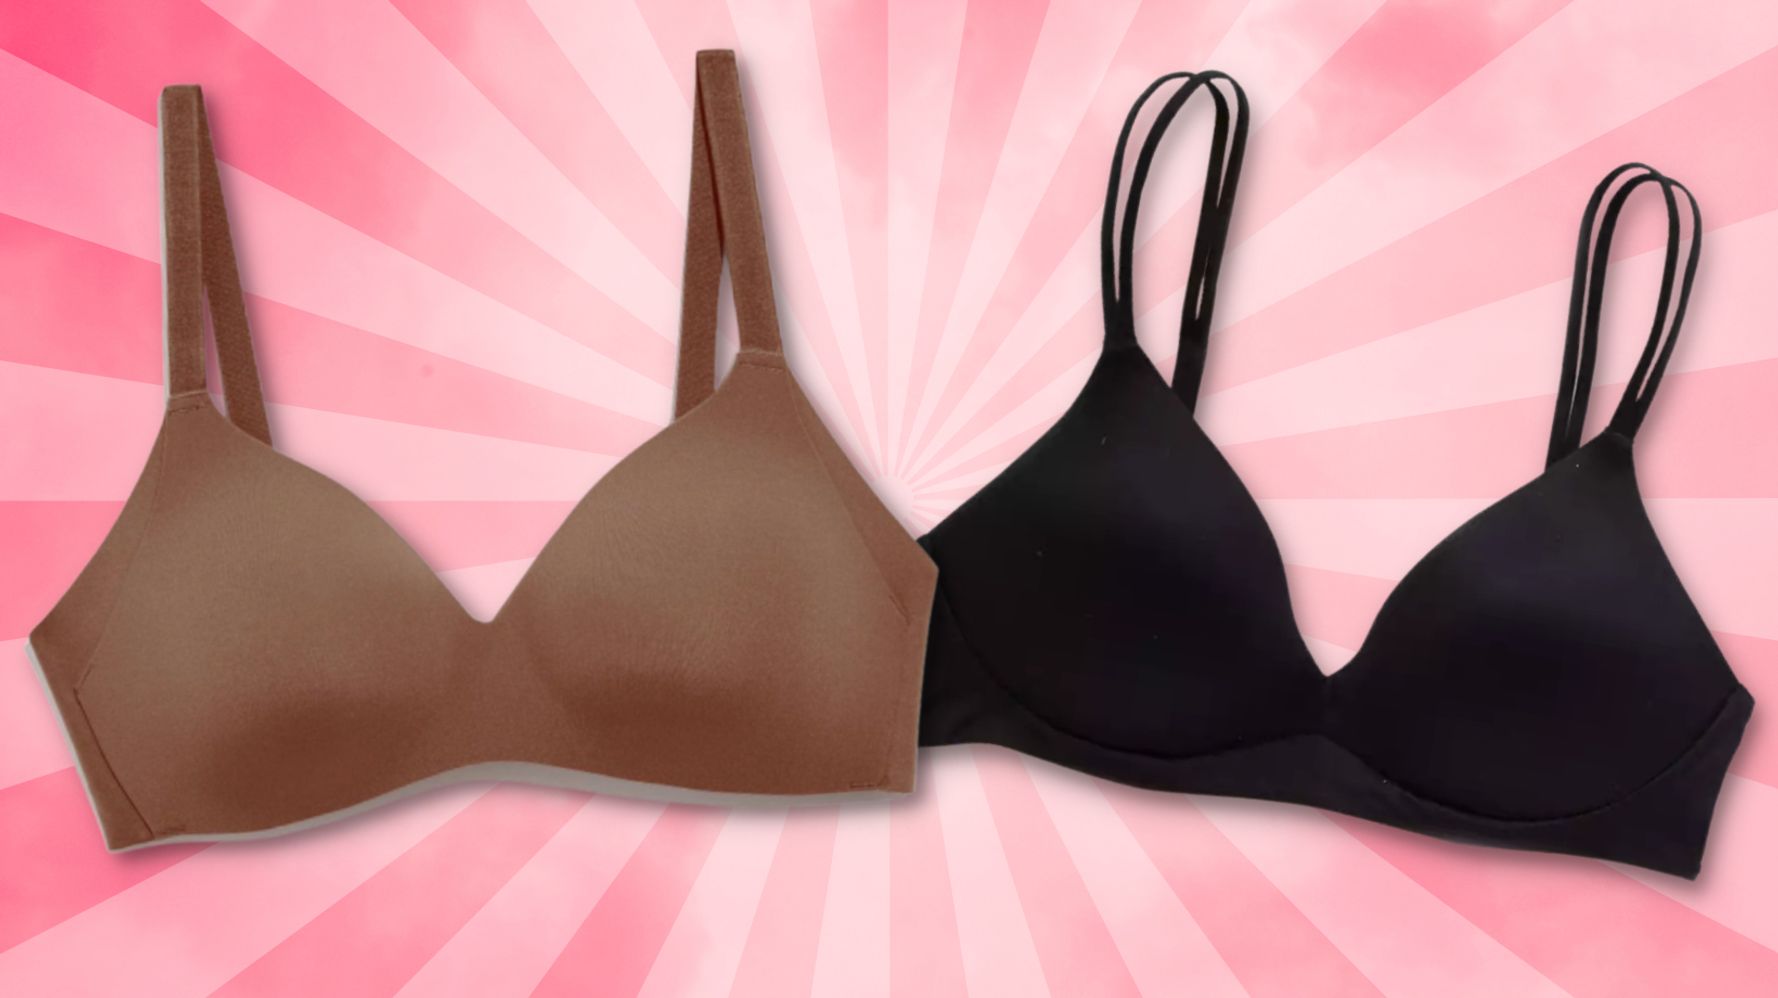 Contour Bras vs. Push-Up Bras: Do YOU Know Which One You're